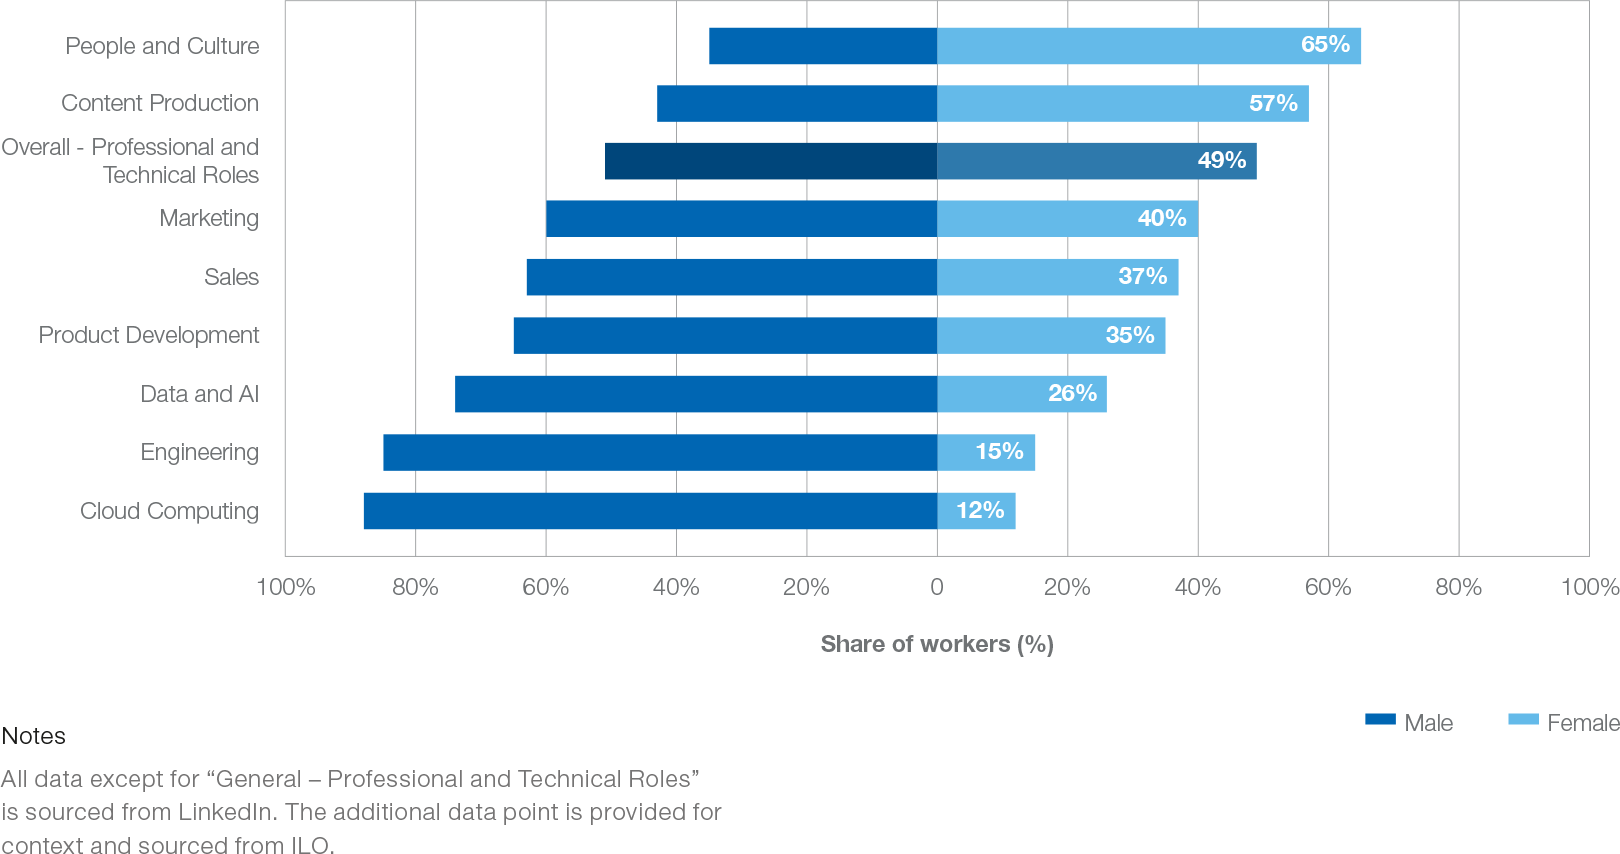 Figure 1 illustrates the extent of gender gaps across the professions at the frontier of the new economy.